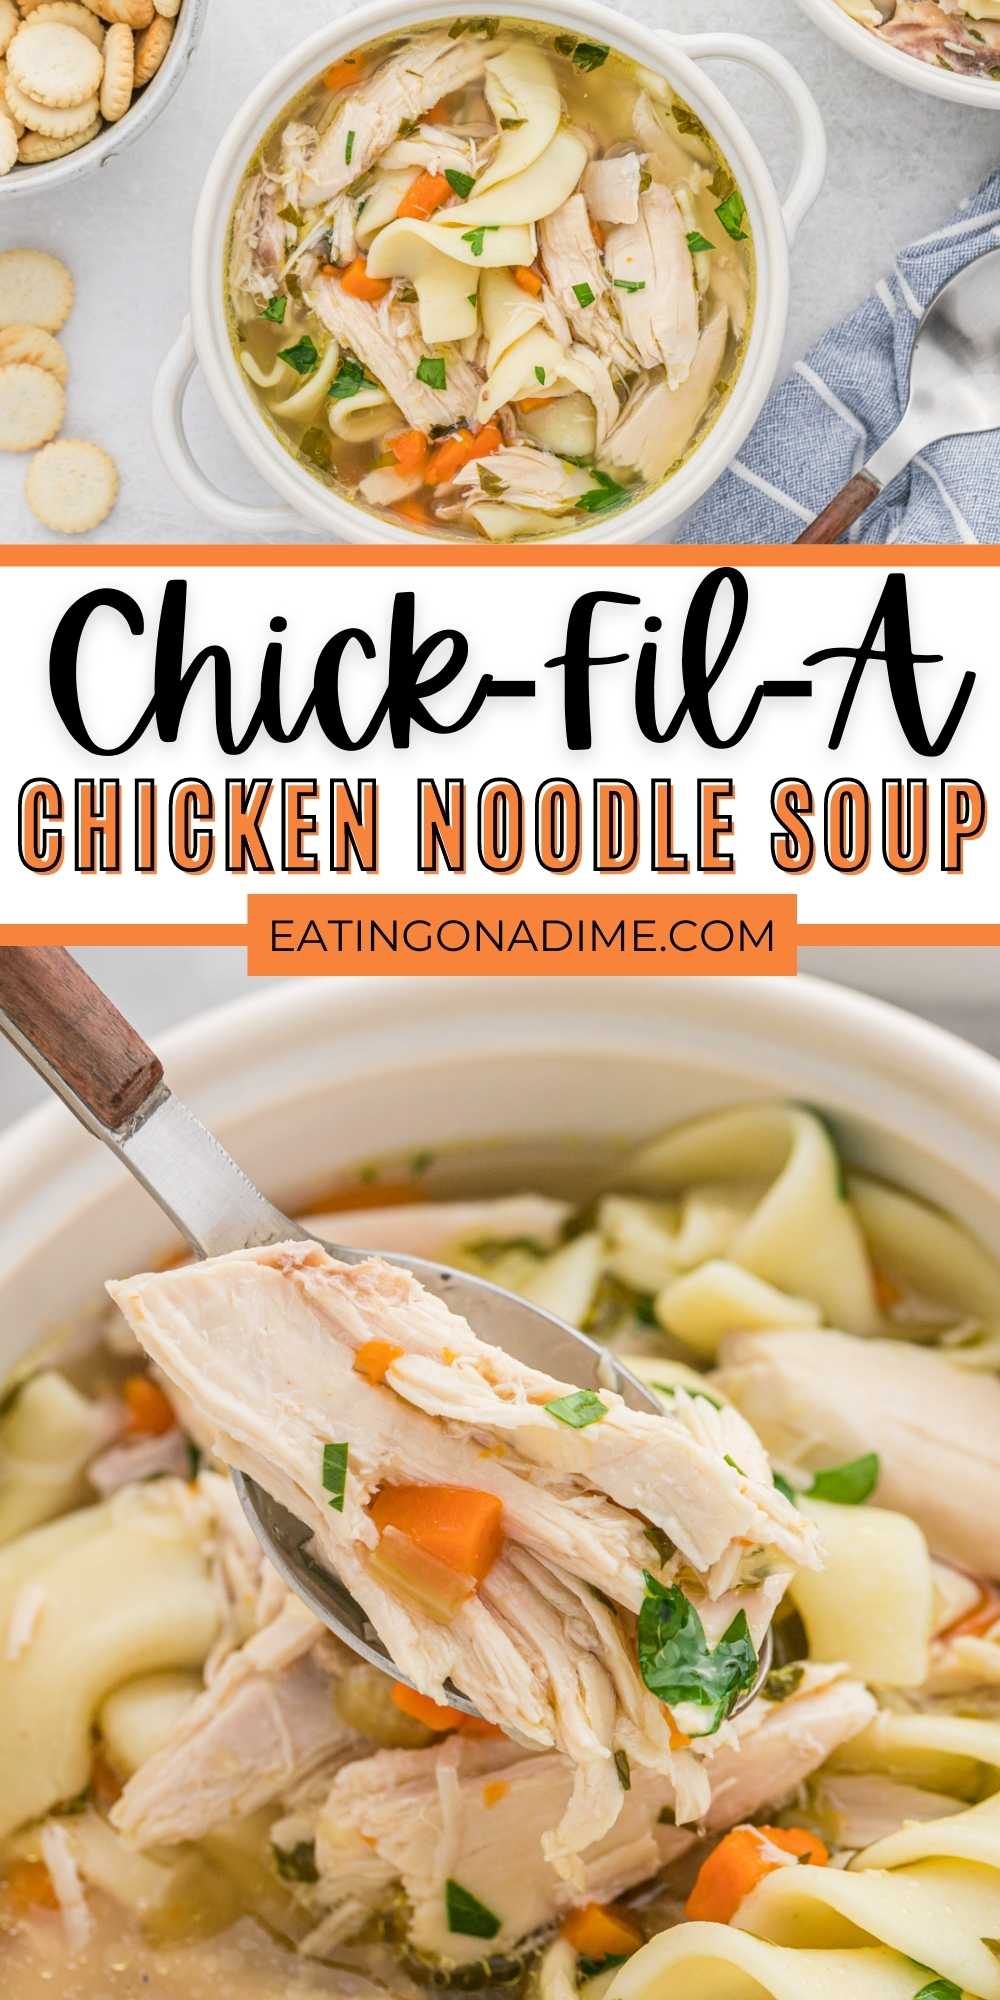 This Chick-Fil-A Chicken Noodle Soup copycat recipe is easy to make. This recipe is made with easy ingredients and loaded with flavor. Warm up to a bowl of Chicken Noodle Soup. #eatingonadime #chickennoodlesoup #chickfilarecipes #copycatrecipes